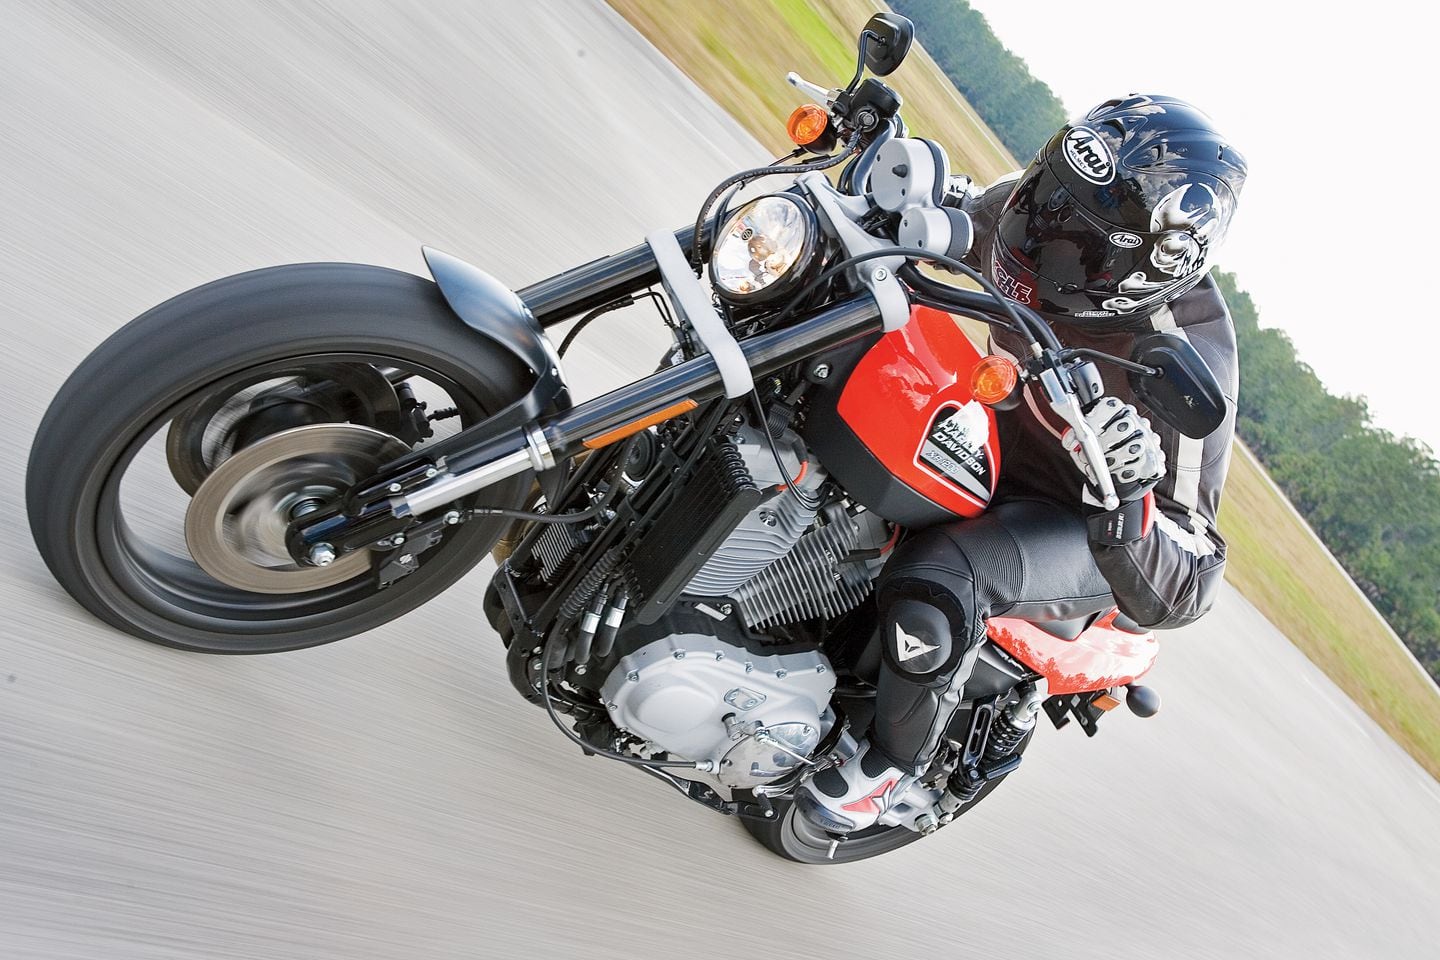 Harley Davidson Xr1200 Sportster Motorcycle Review Cycle World